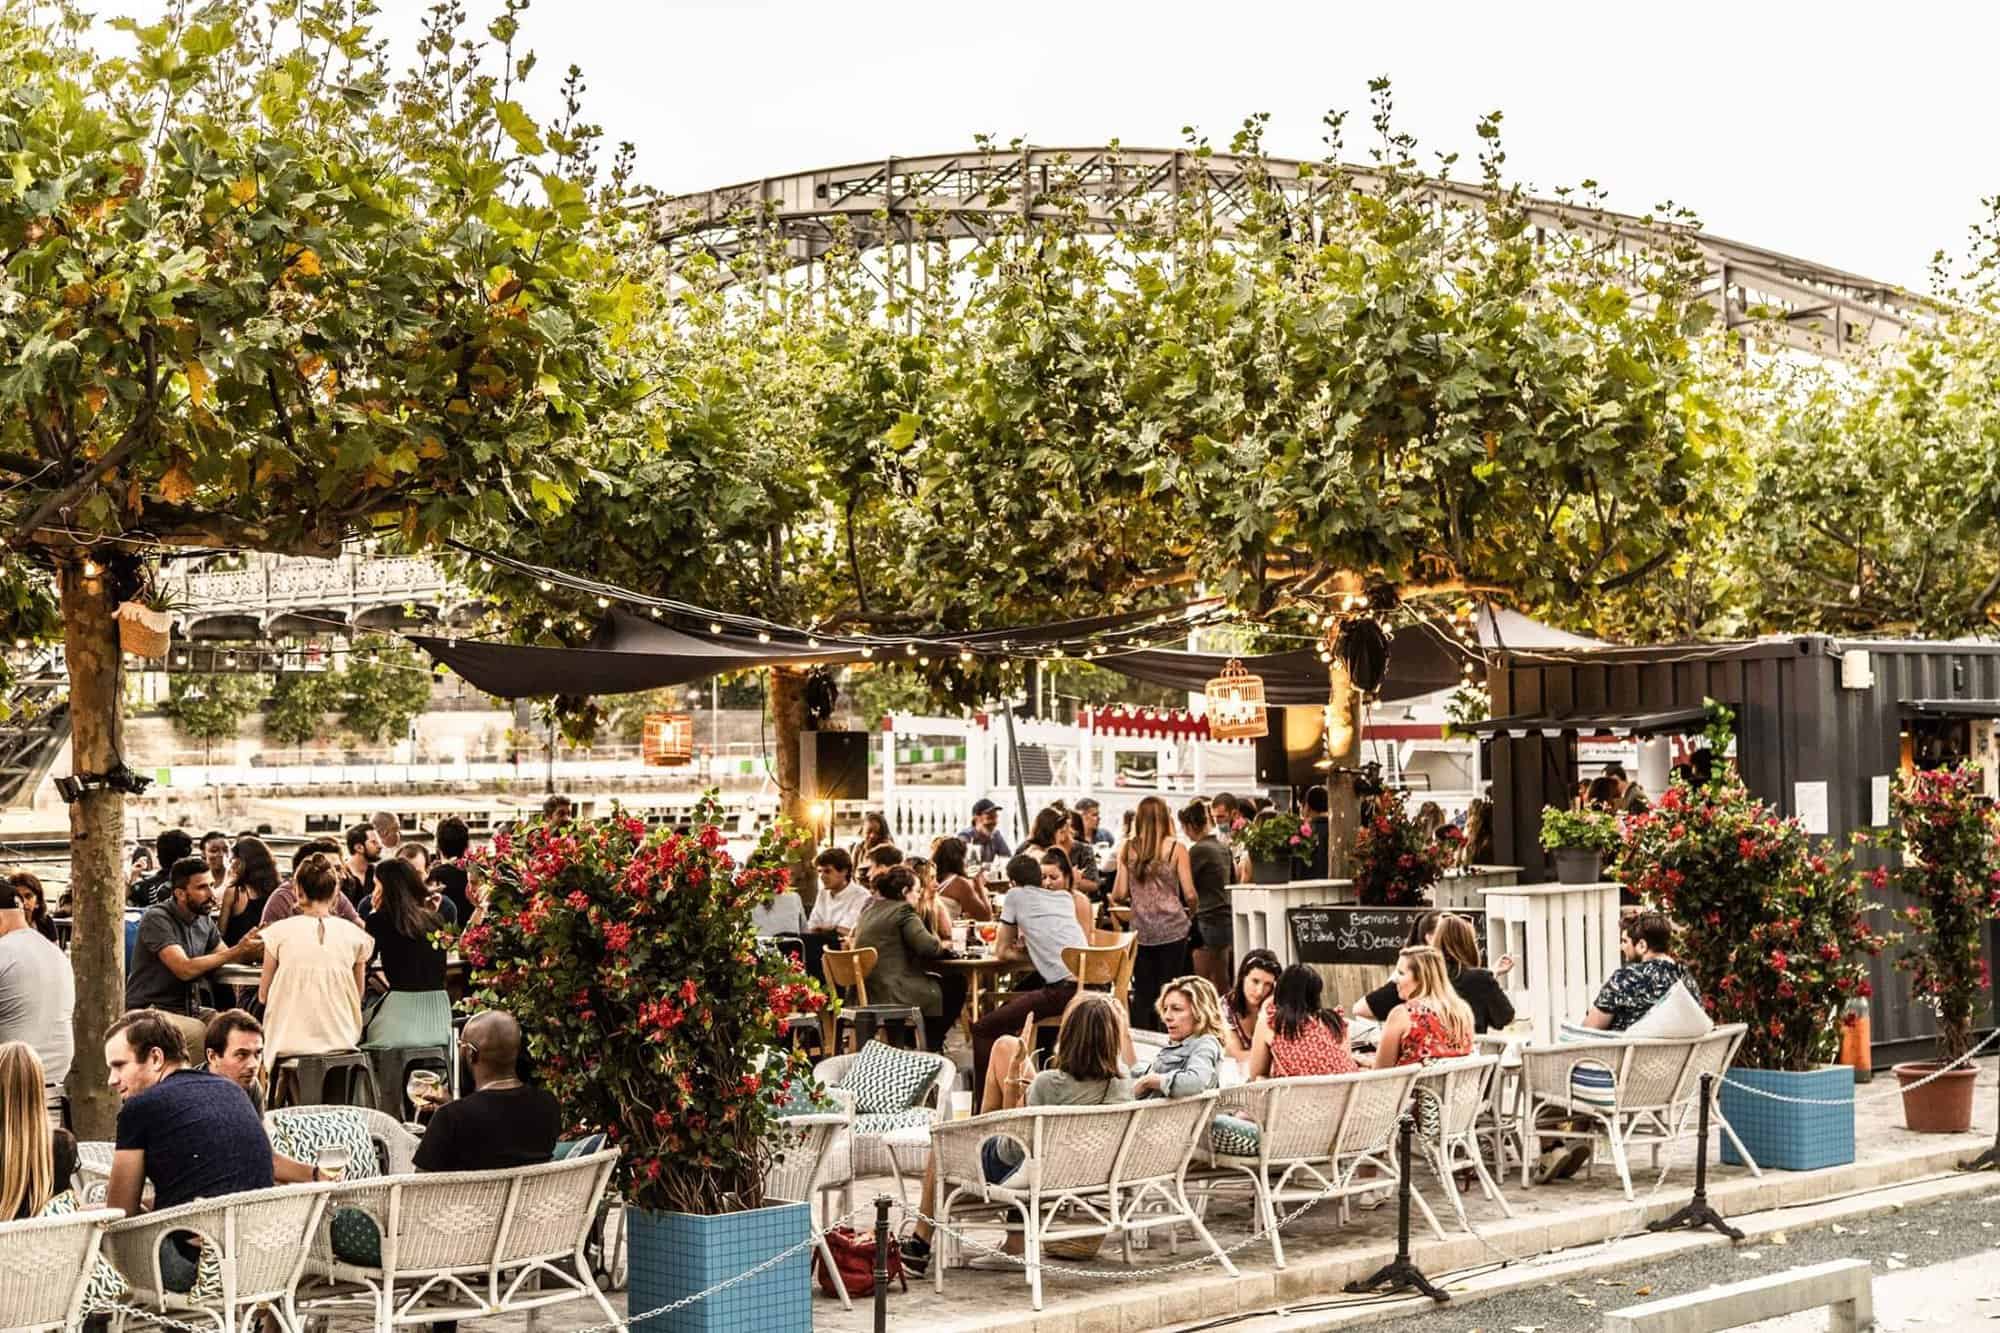 A bustling terrace next to the Seine, shaded by trees and surrounded by plant pots.